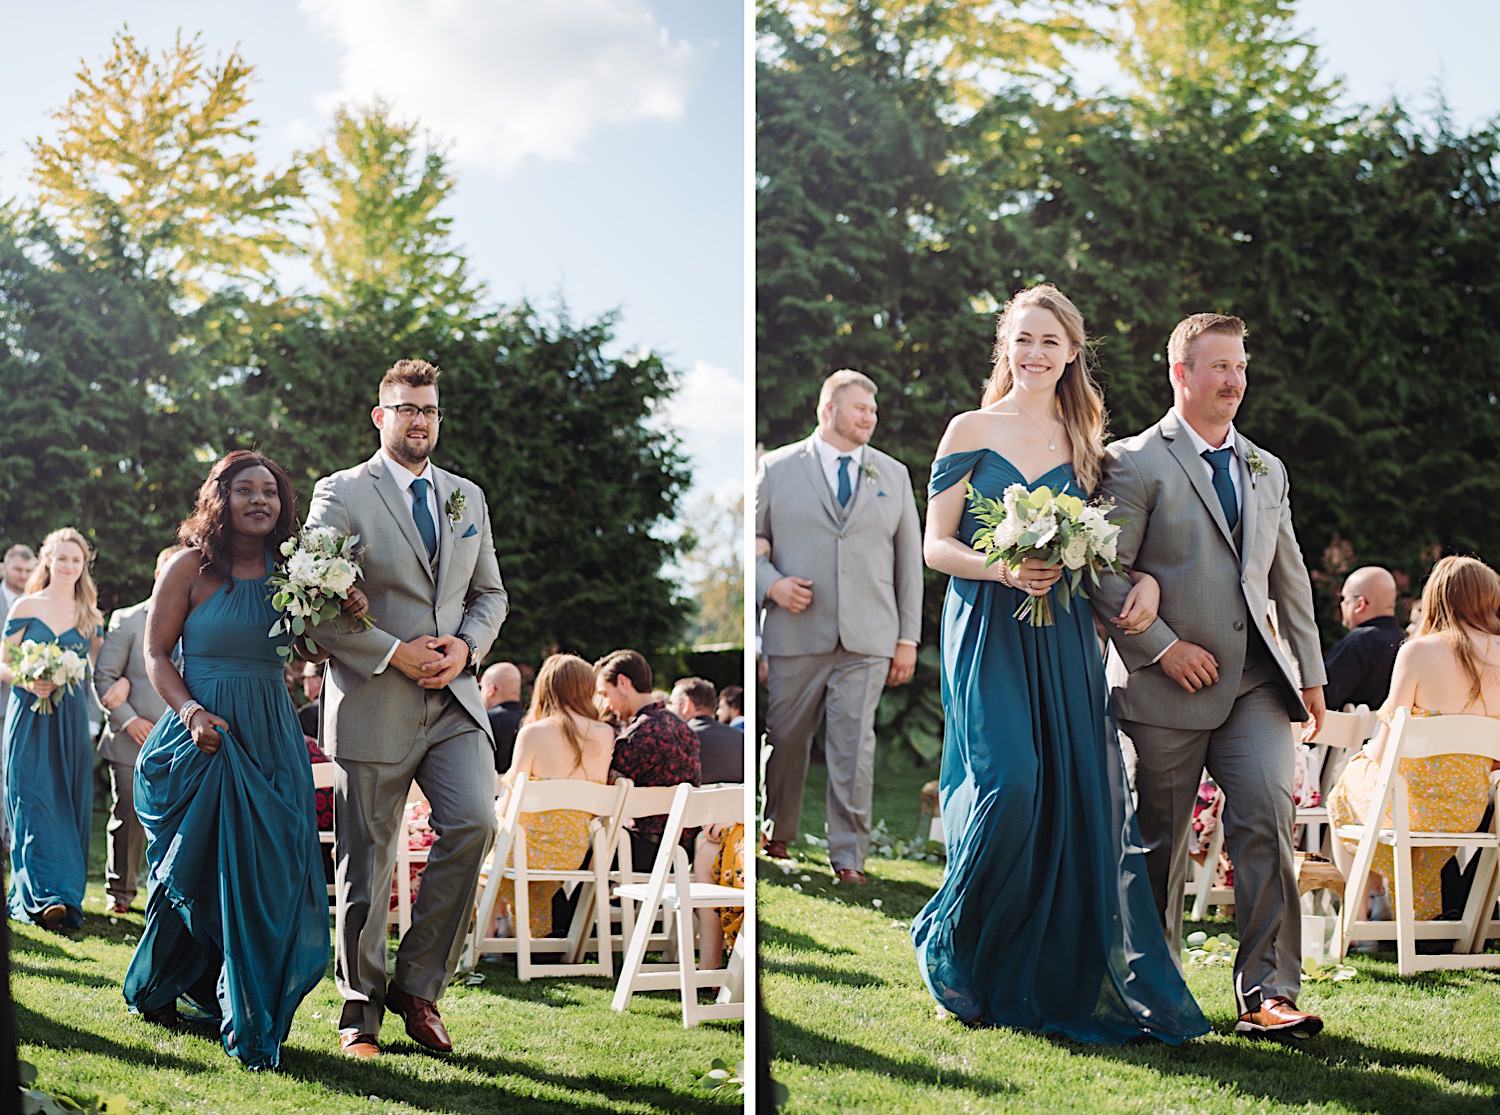 bridesmaids and groomsmen walking in wedding ceremony at Pine Creek Farms and Nursery